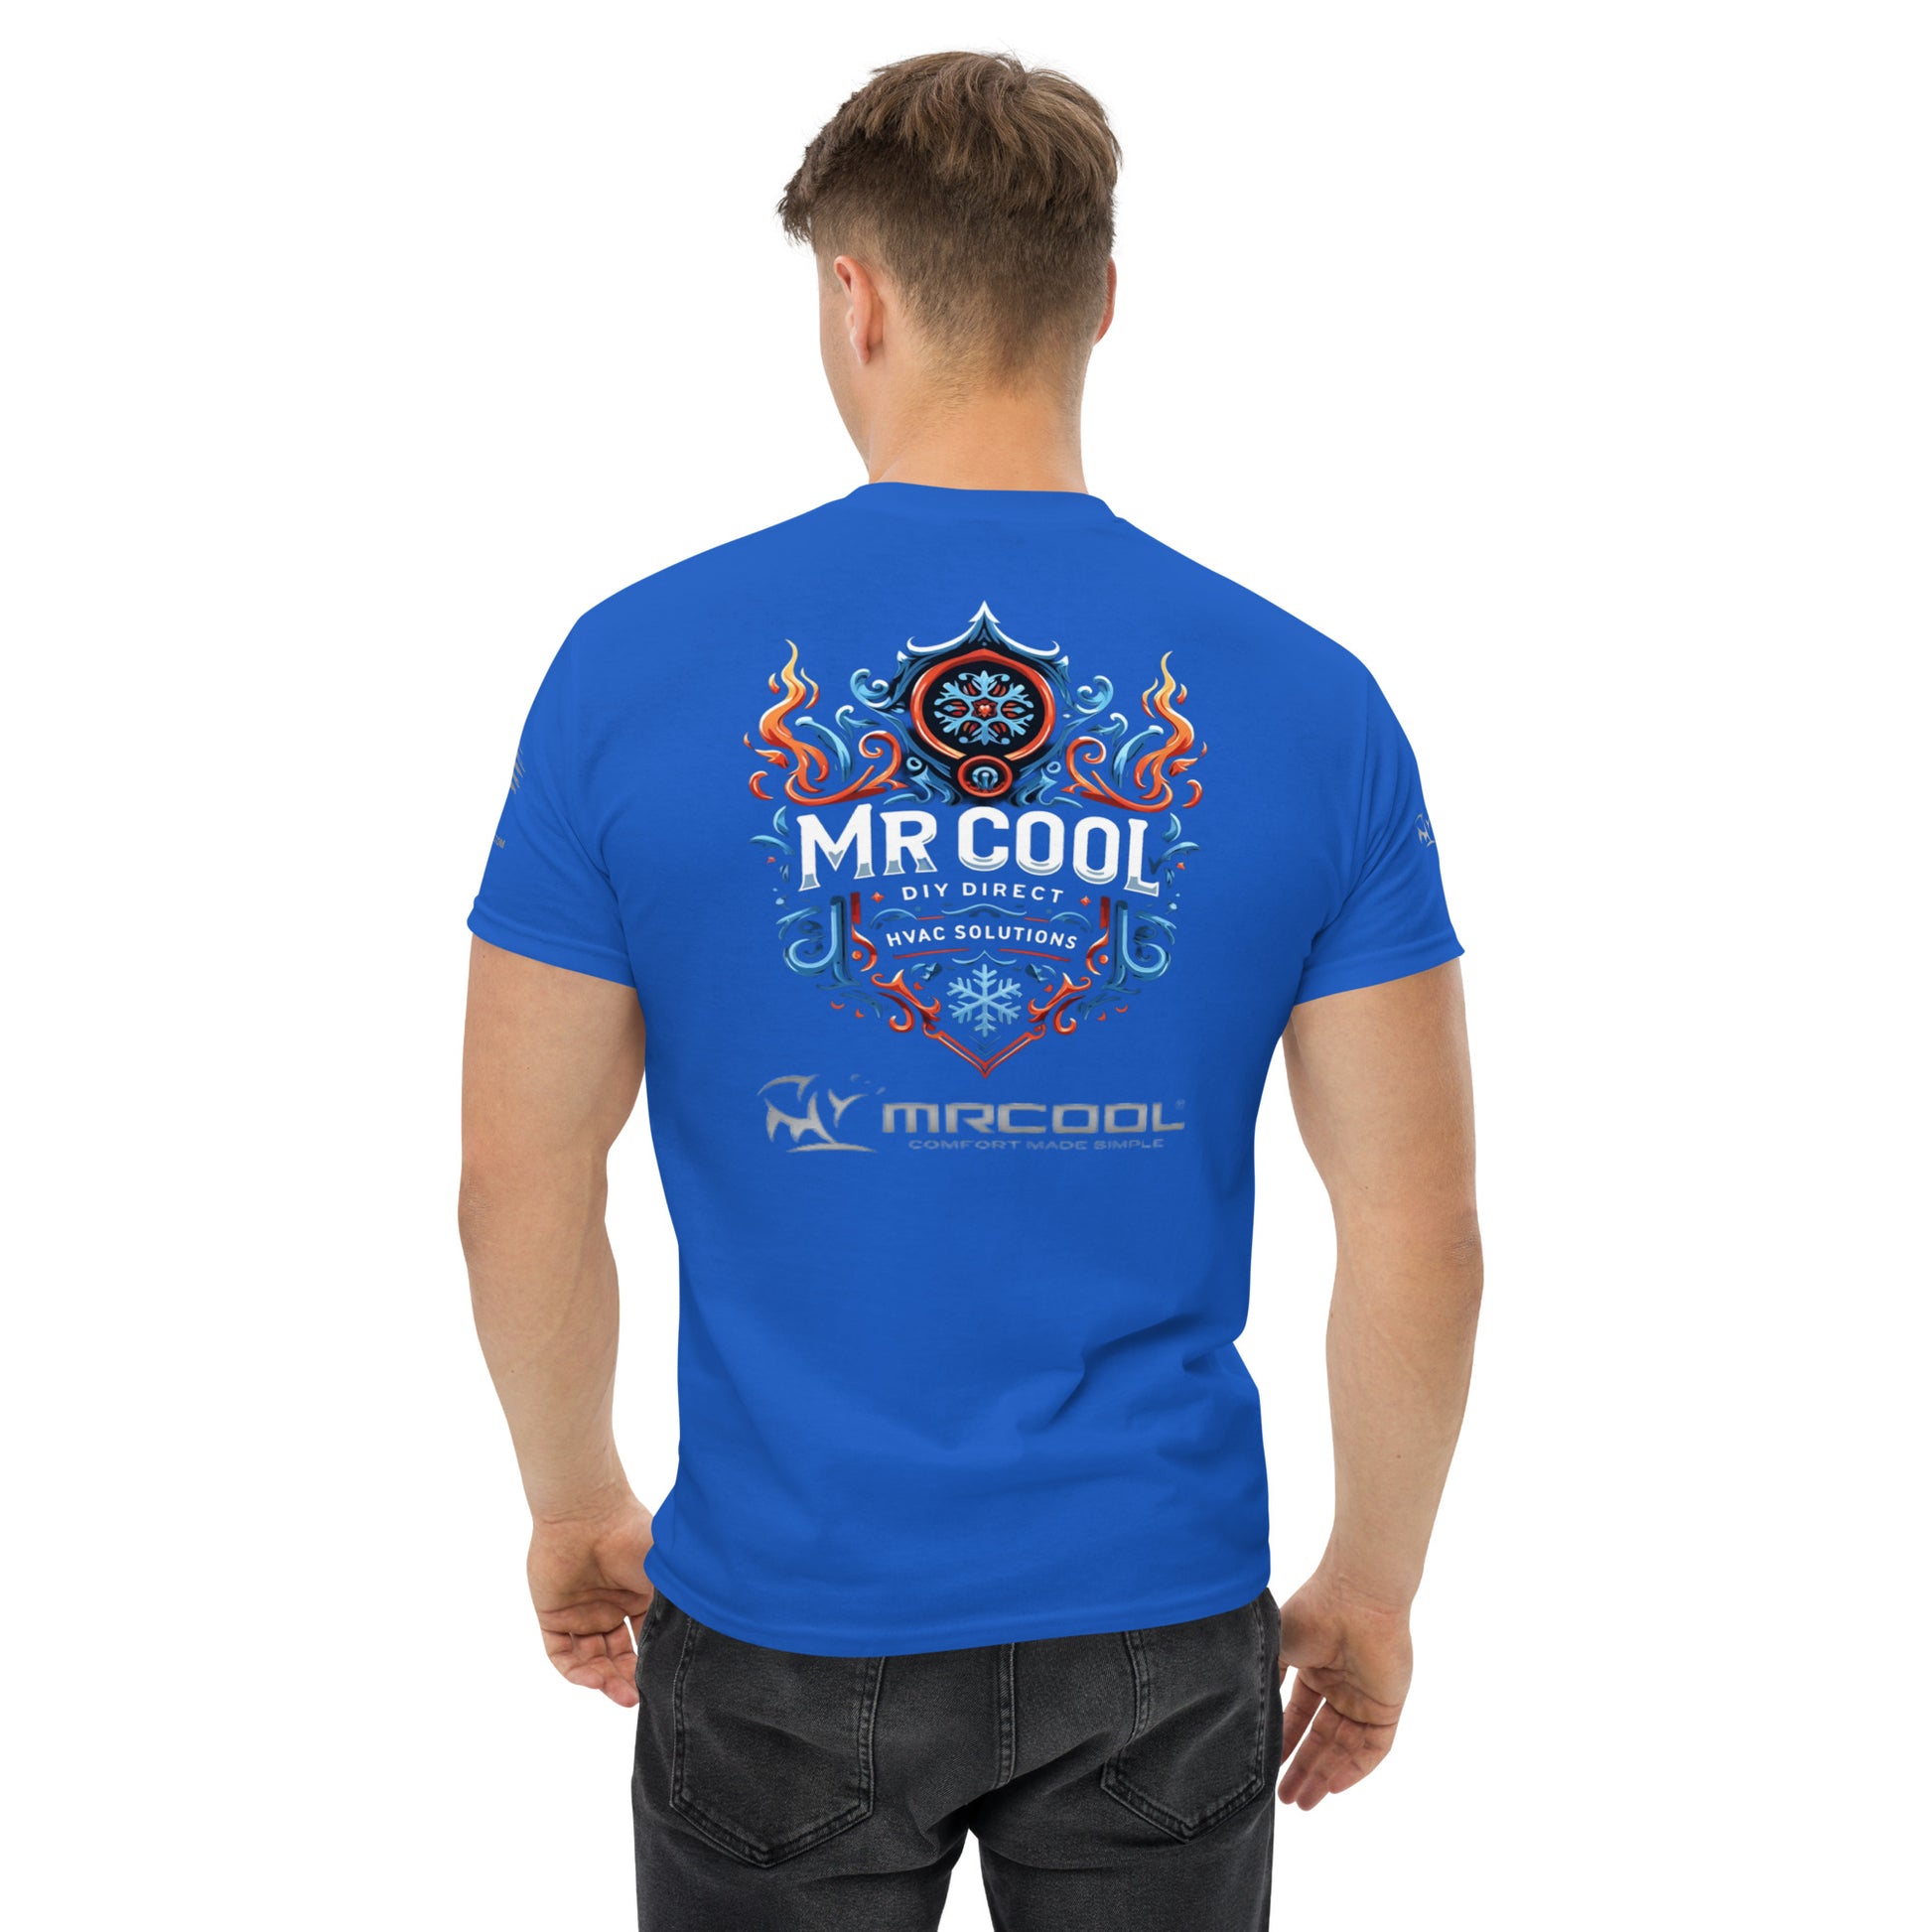 A man viewed from behind wearing a bright blue t-shirt with "Exclusive HVAC-Themed Custom Tees - MRCOOL DIY Direct" printed in graphic style, featuring flames and a circular emblem by The Salty Medic.